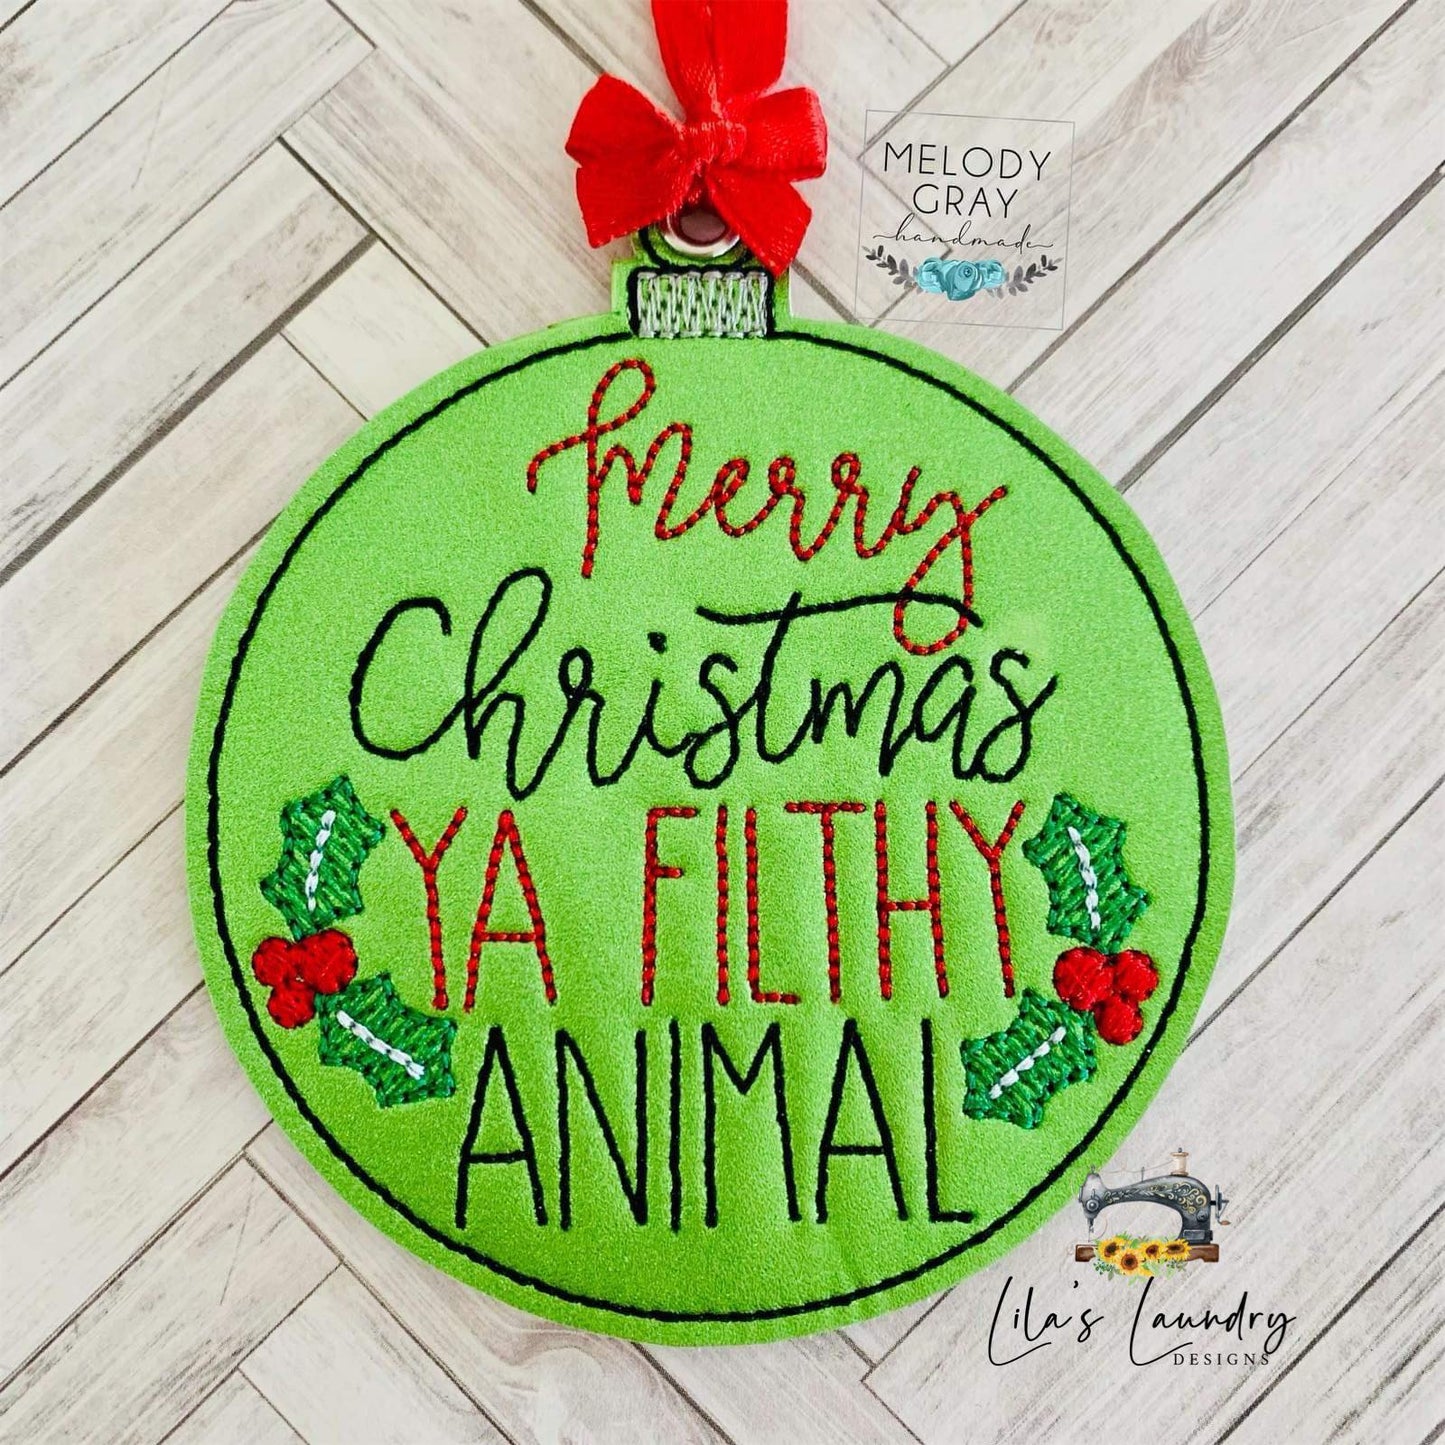 Filthy Animal Ornament - Digital Embroidery Design